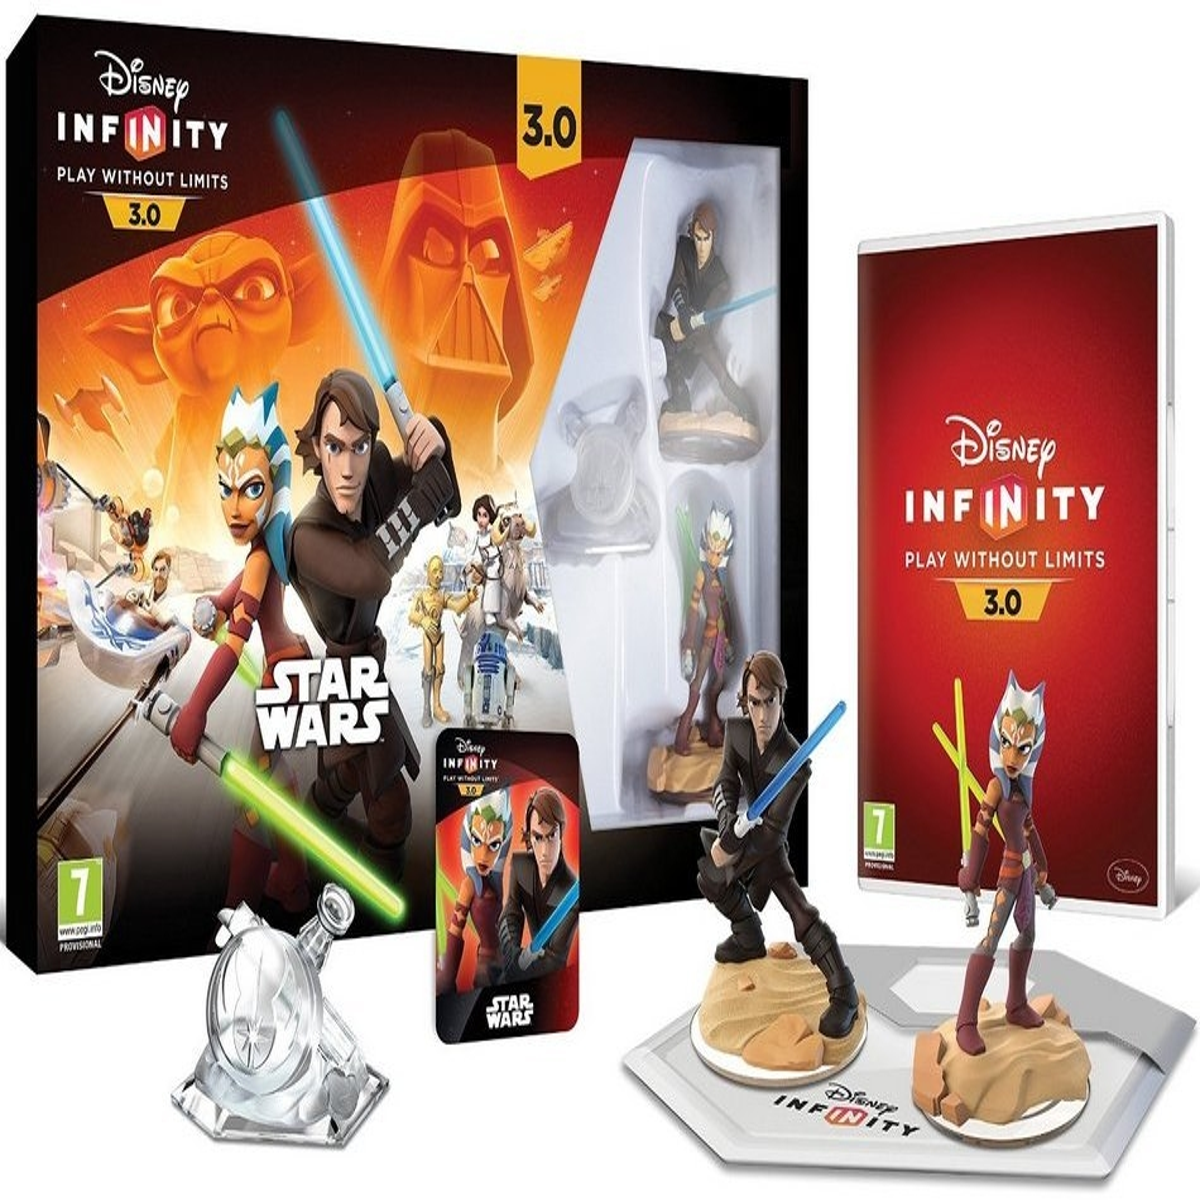 Disney Infinity video game discontinued - CNET